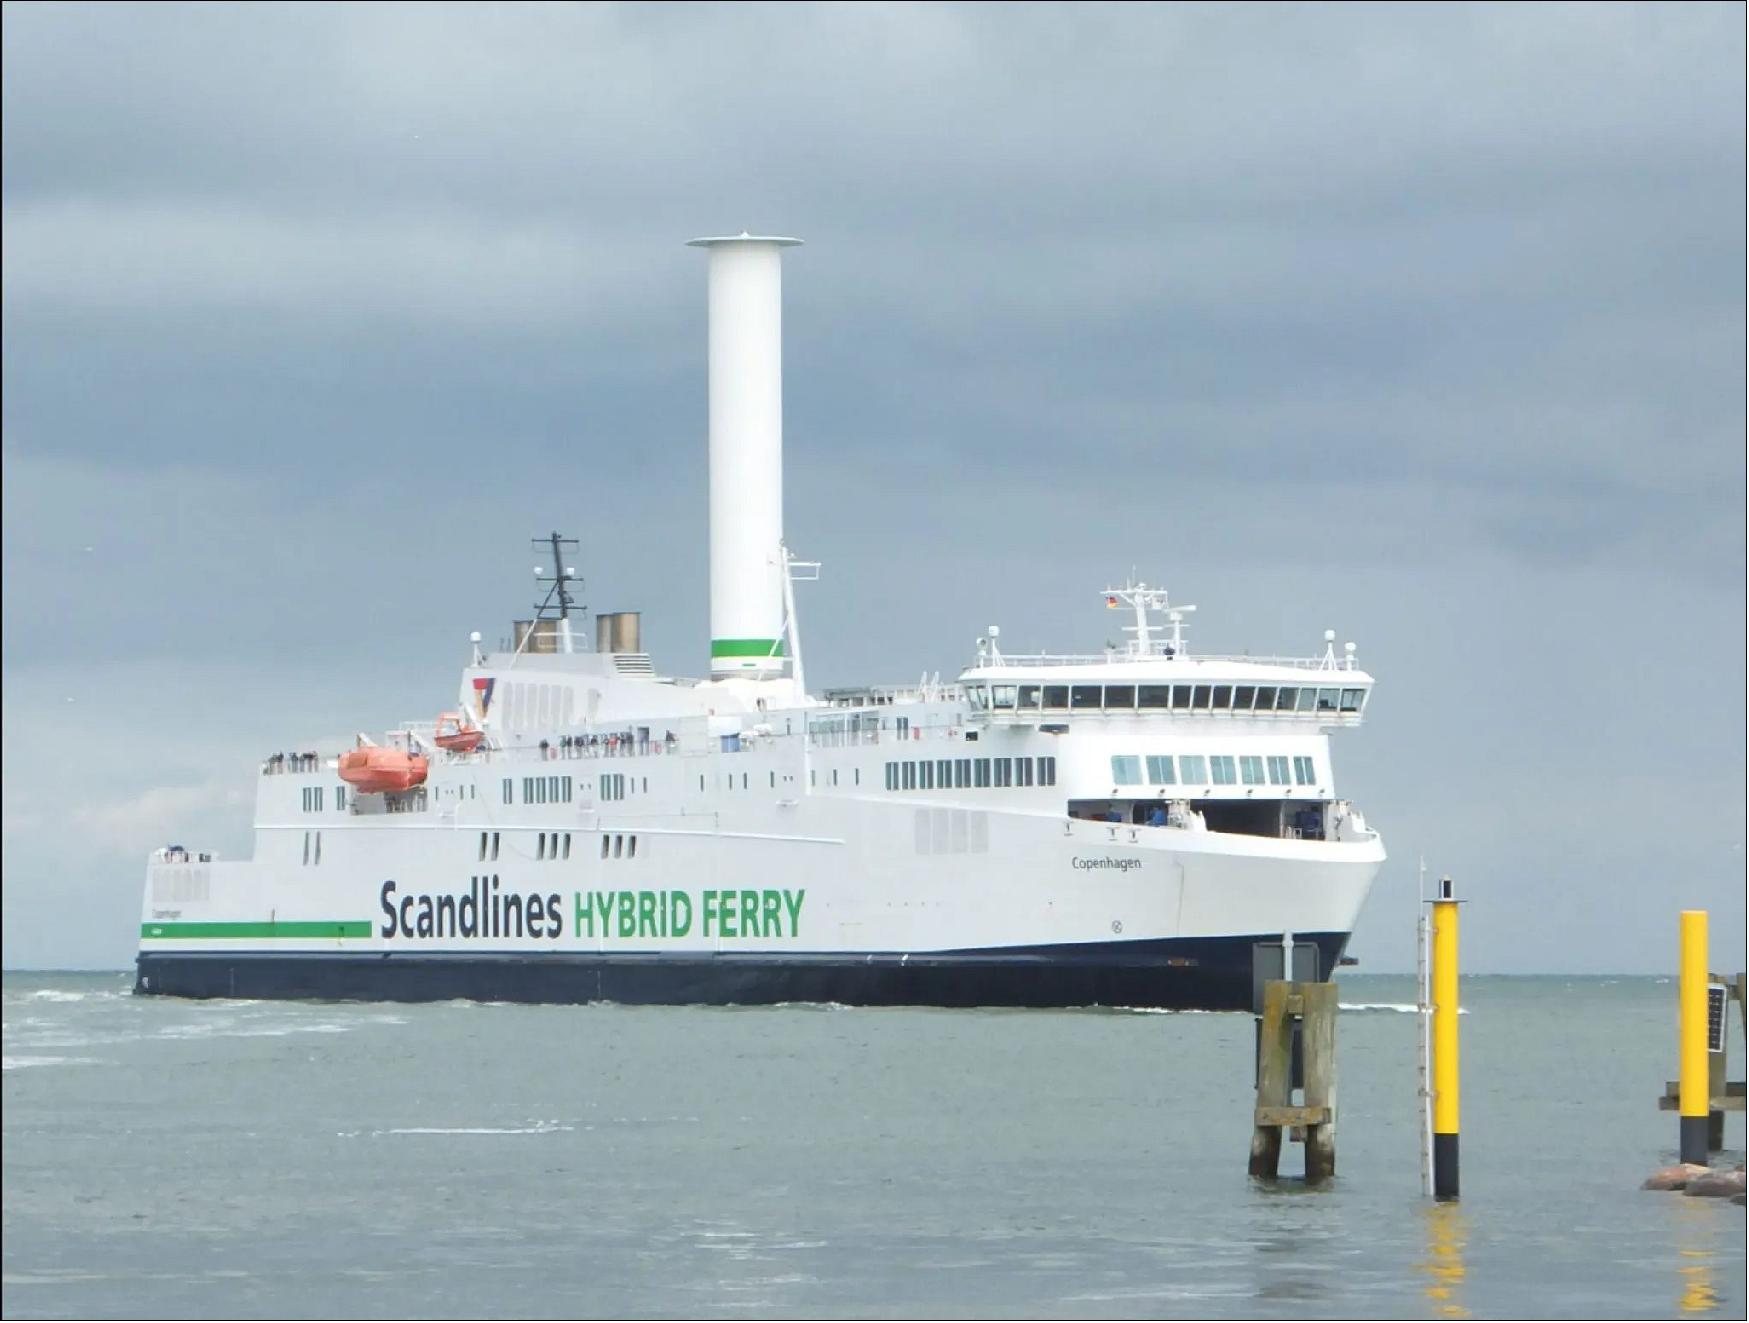 Figure 138: The Norsepower Rotor Sail was installed onboard its 2016-built hybrid ferry, Copenhagen, in 2020. Following a year of data collection and proven savings in fuel and CO2 emissions, Scandlines has committed to a second installation onboard Copenhagen’s sister vessel, Berlin (image credit: Scandlines)